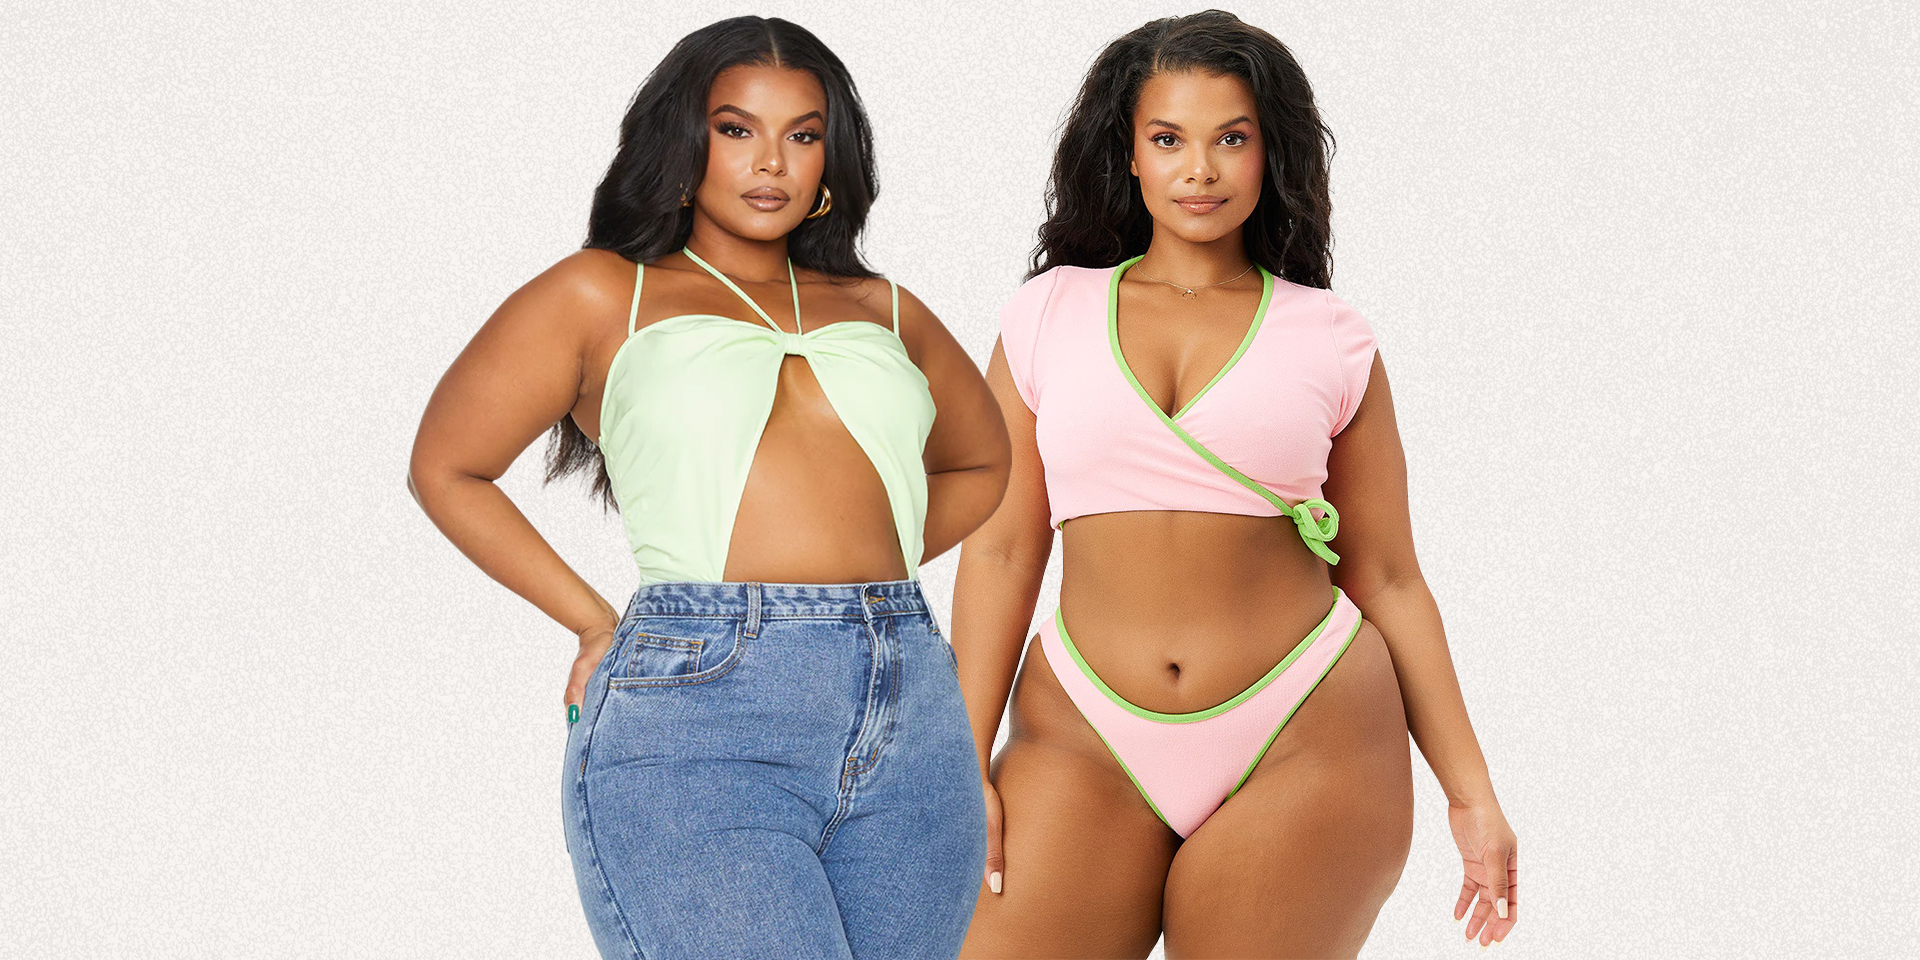 ASOS have have created a gross green bra that looks like it's put